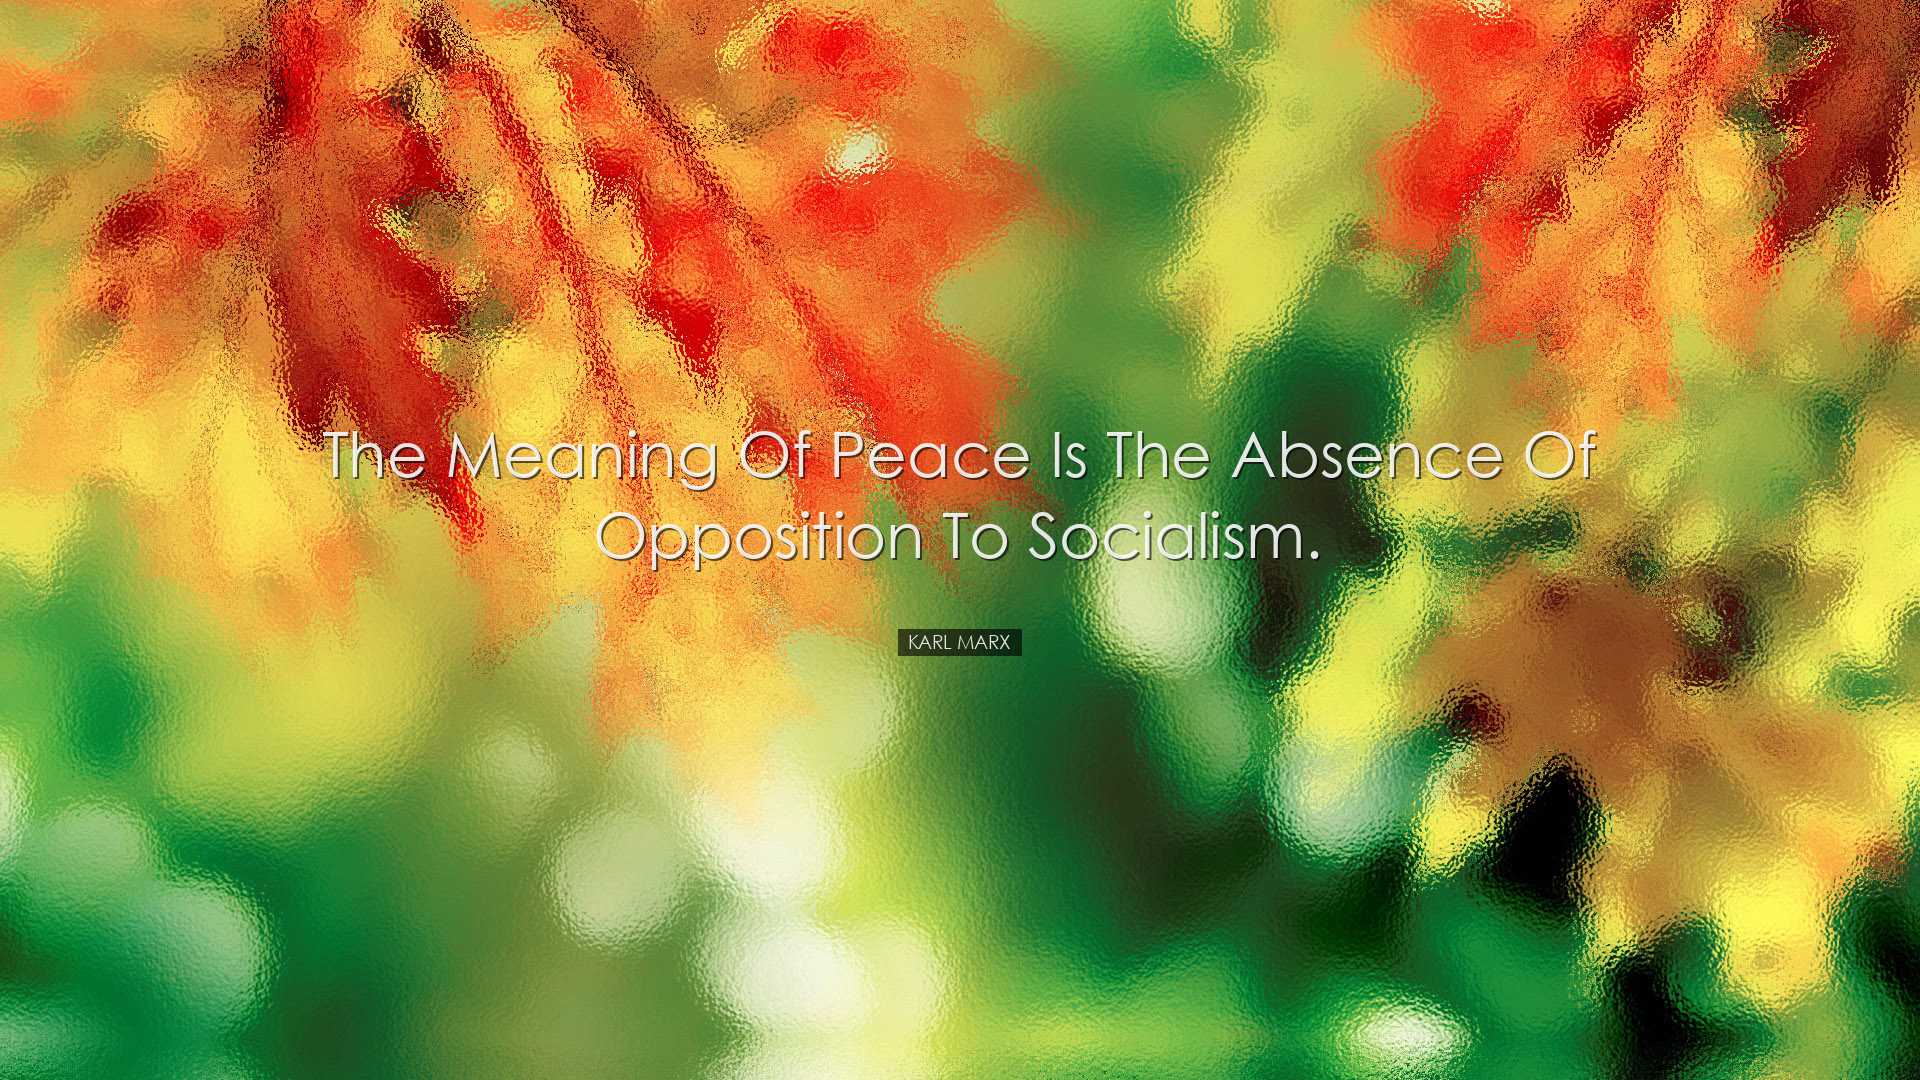 The meaning of peace is the absence of opposition to socialism. -